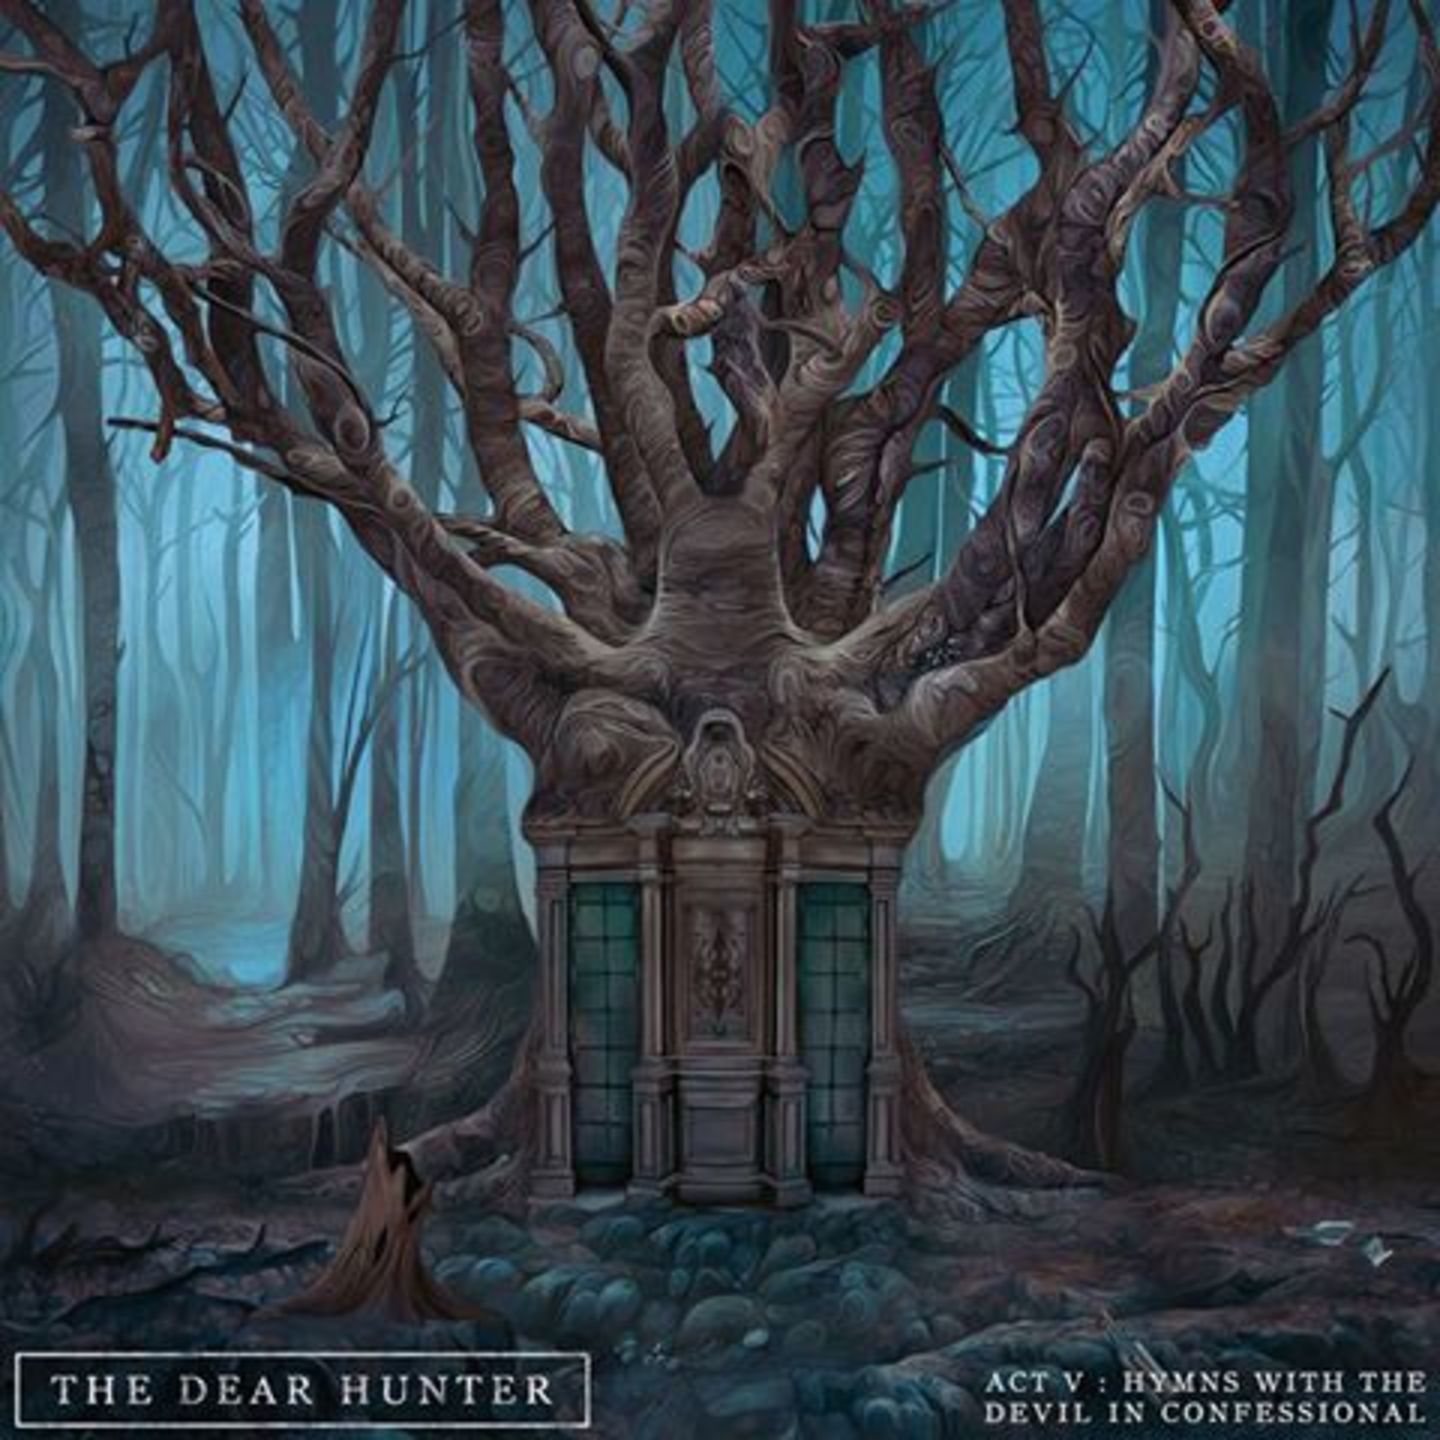 DEAR HUNTER, THE - Act V Hymns With The Devil In Confessional 2xLP